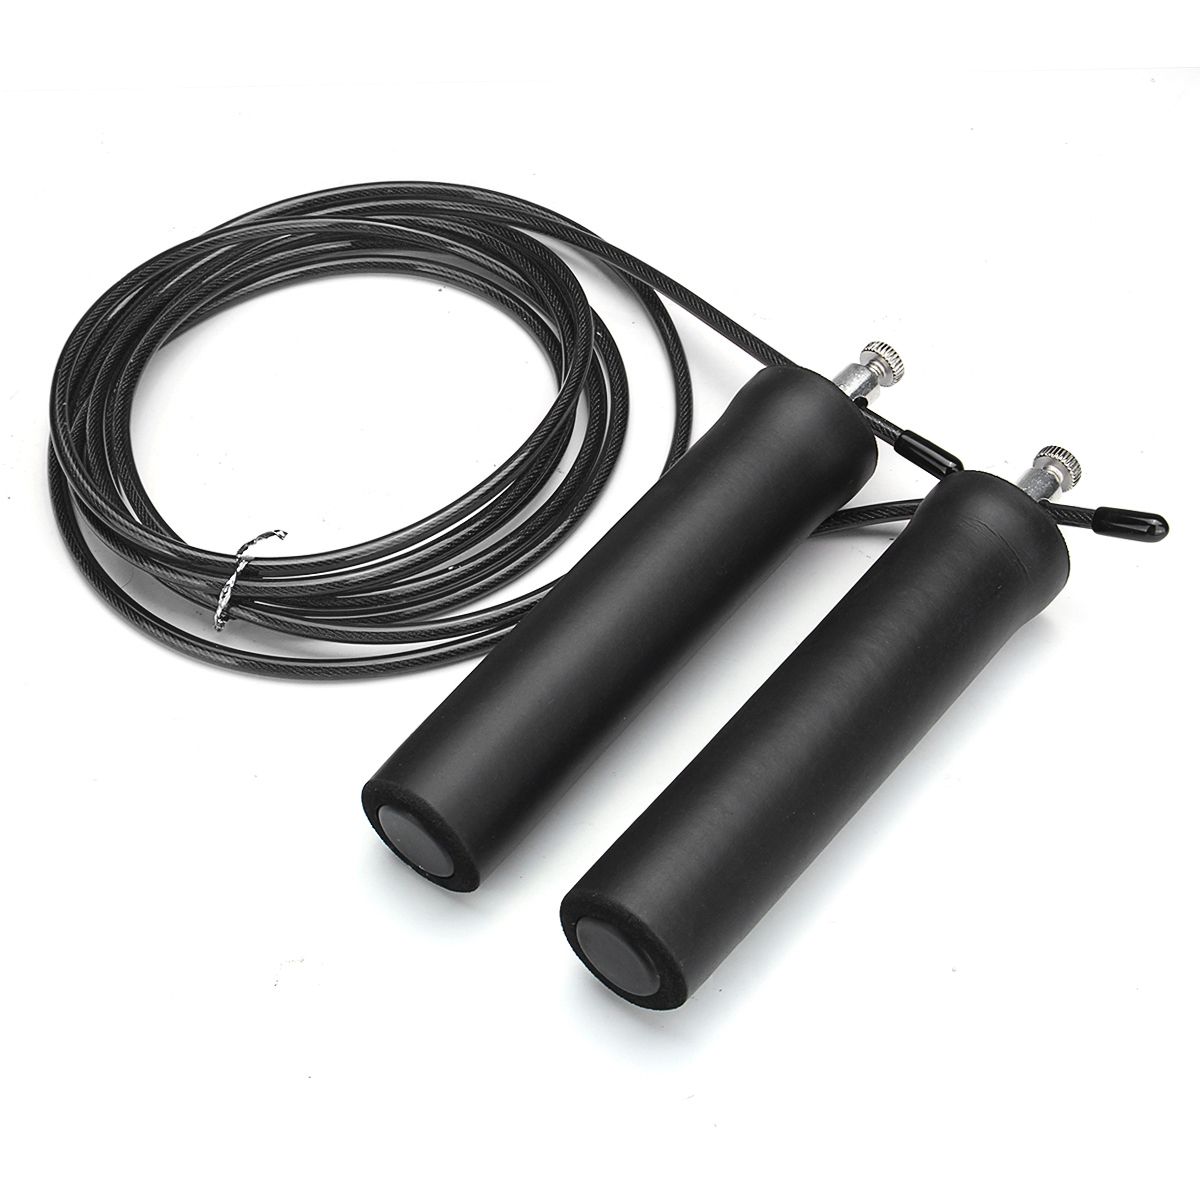 3M-Steel-Wire-Speed-Skipping-Rope-Jumping-Rope-Adjustable-Crossfit-Fitnesss-Exercise-1307727